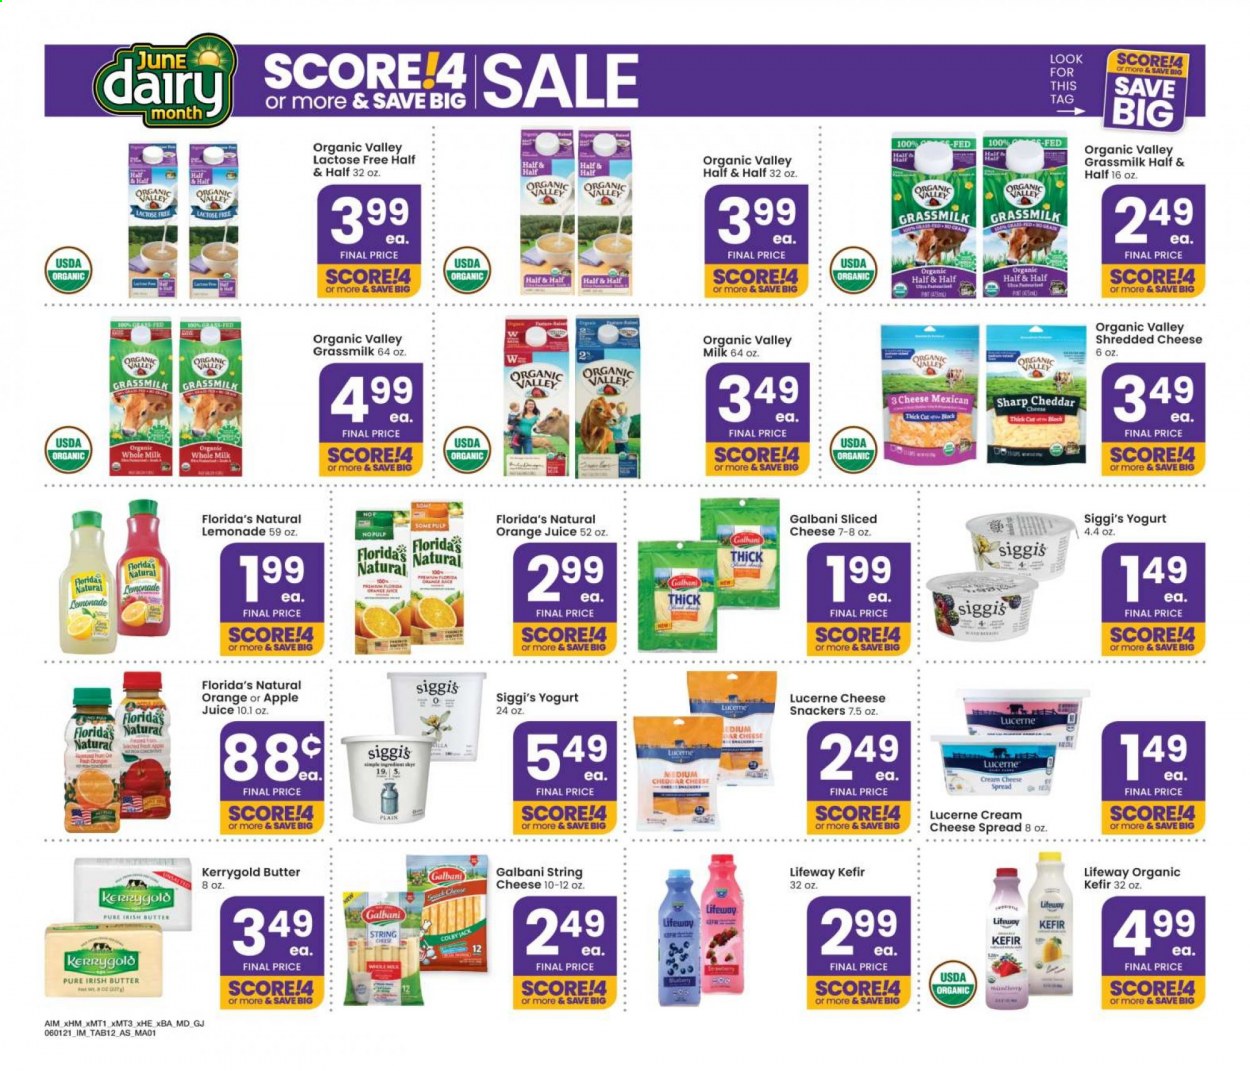 thumbnail - Albertsons Flyer - 06/01/2021 - 06/28/2021 - Sales products - cheese spread, Colby cheese, cream cheese, shredded cheese, sliced cheese, string cheese, cheddar, Galbani, yoghurt, milk, kefir, irish butter, Florida's Natural, apple juice, lemonade, orange juice, juice, Half and half. Page 12.